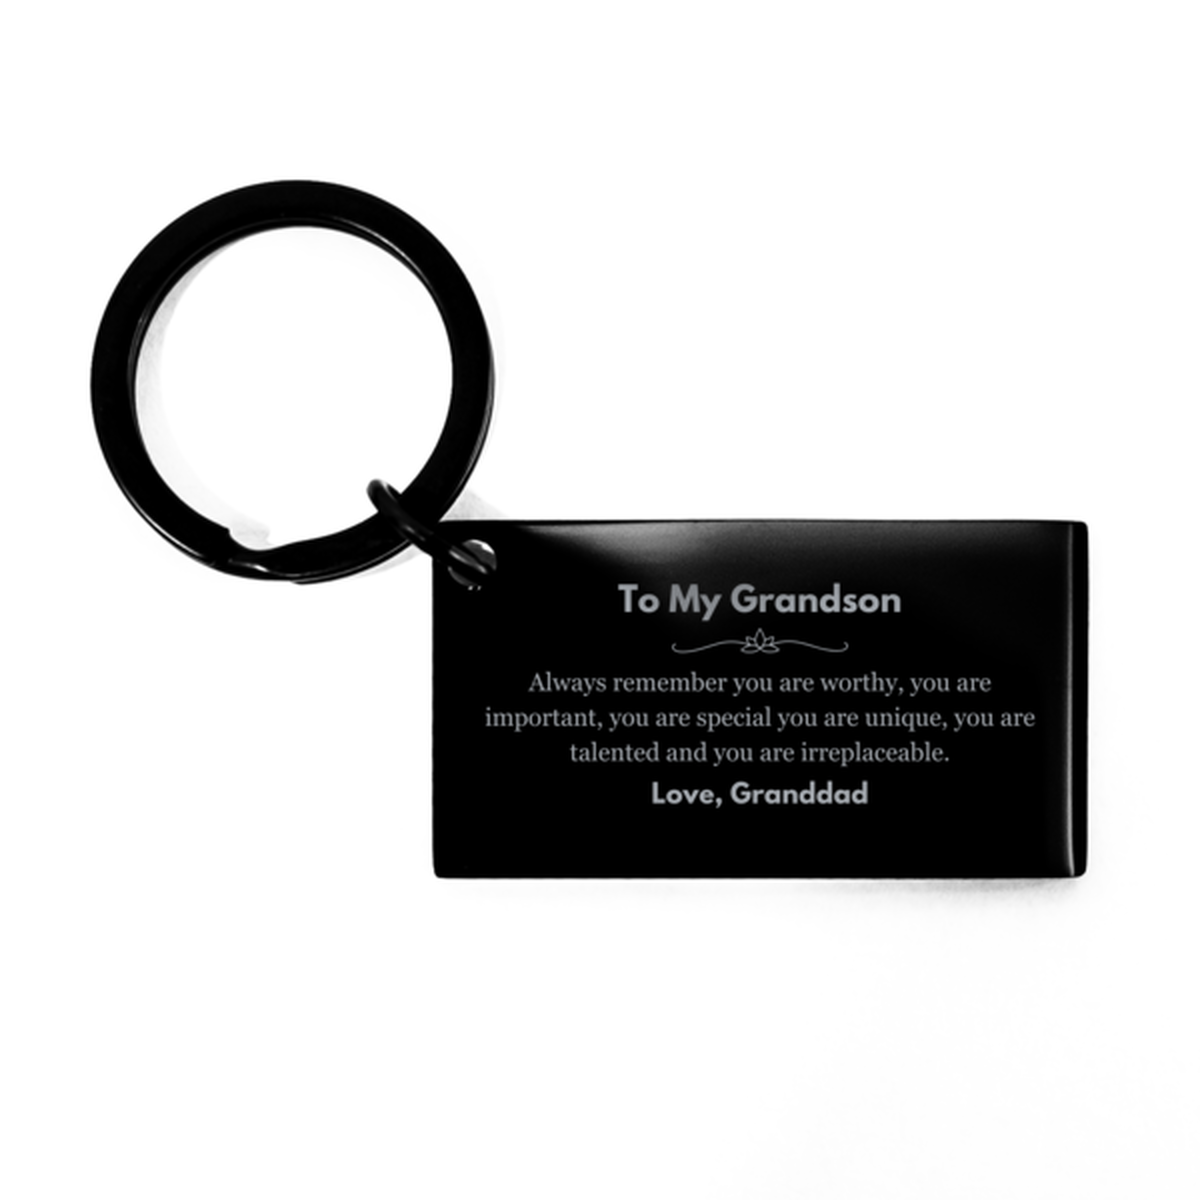 Grandson Birthday Gifts from Granddad, Inspirational Keychain for Grandson Christmas Graduation Gifts for Grandson Always remember you are worthy, you are important. Love, Granddad